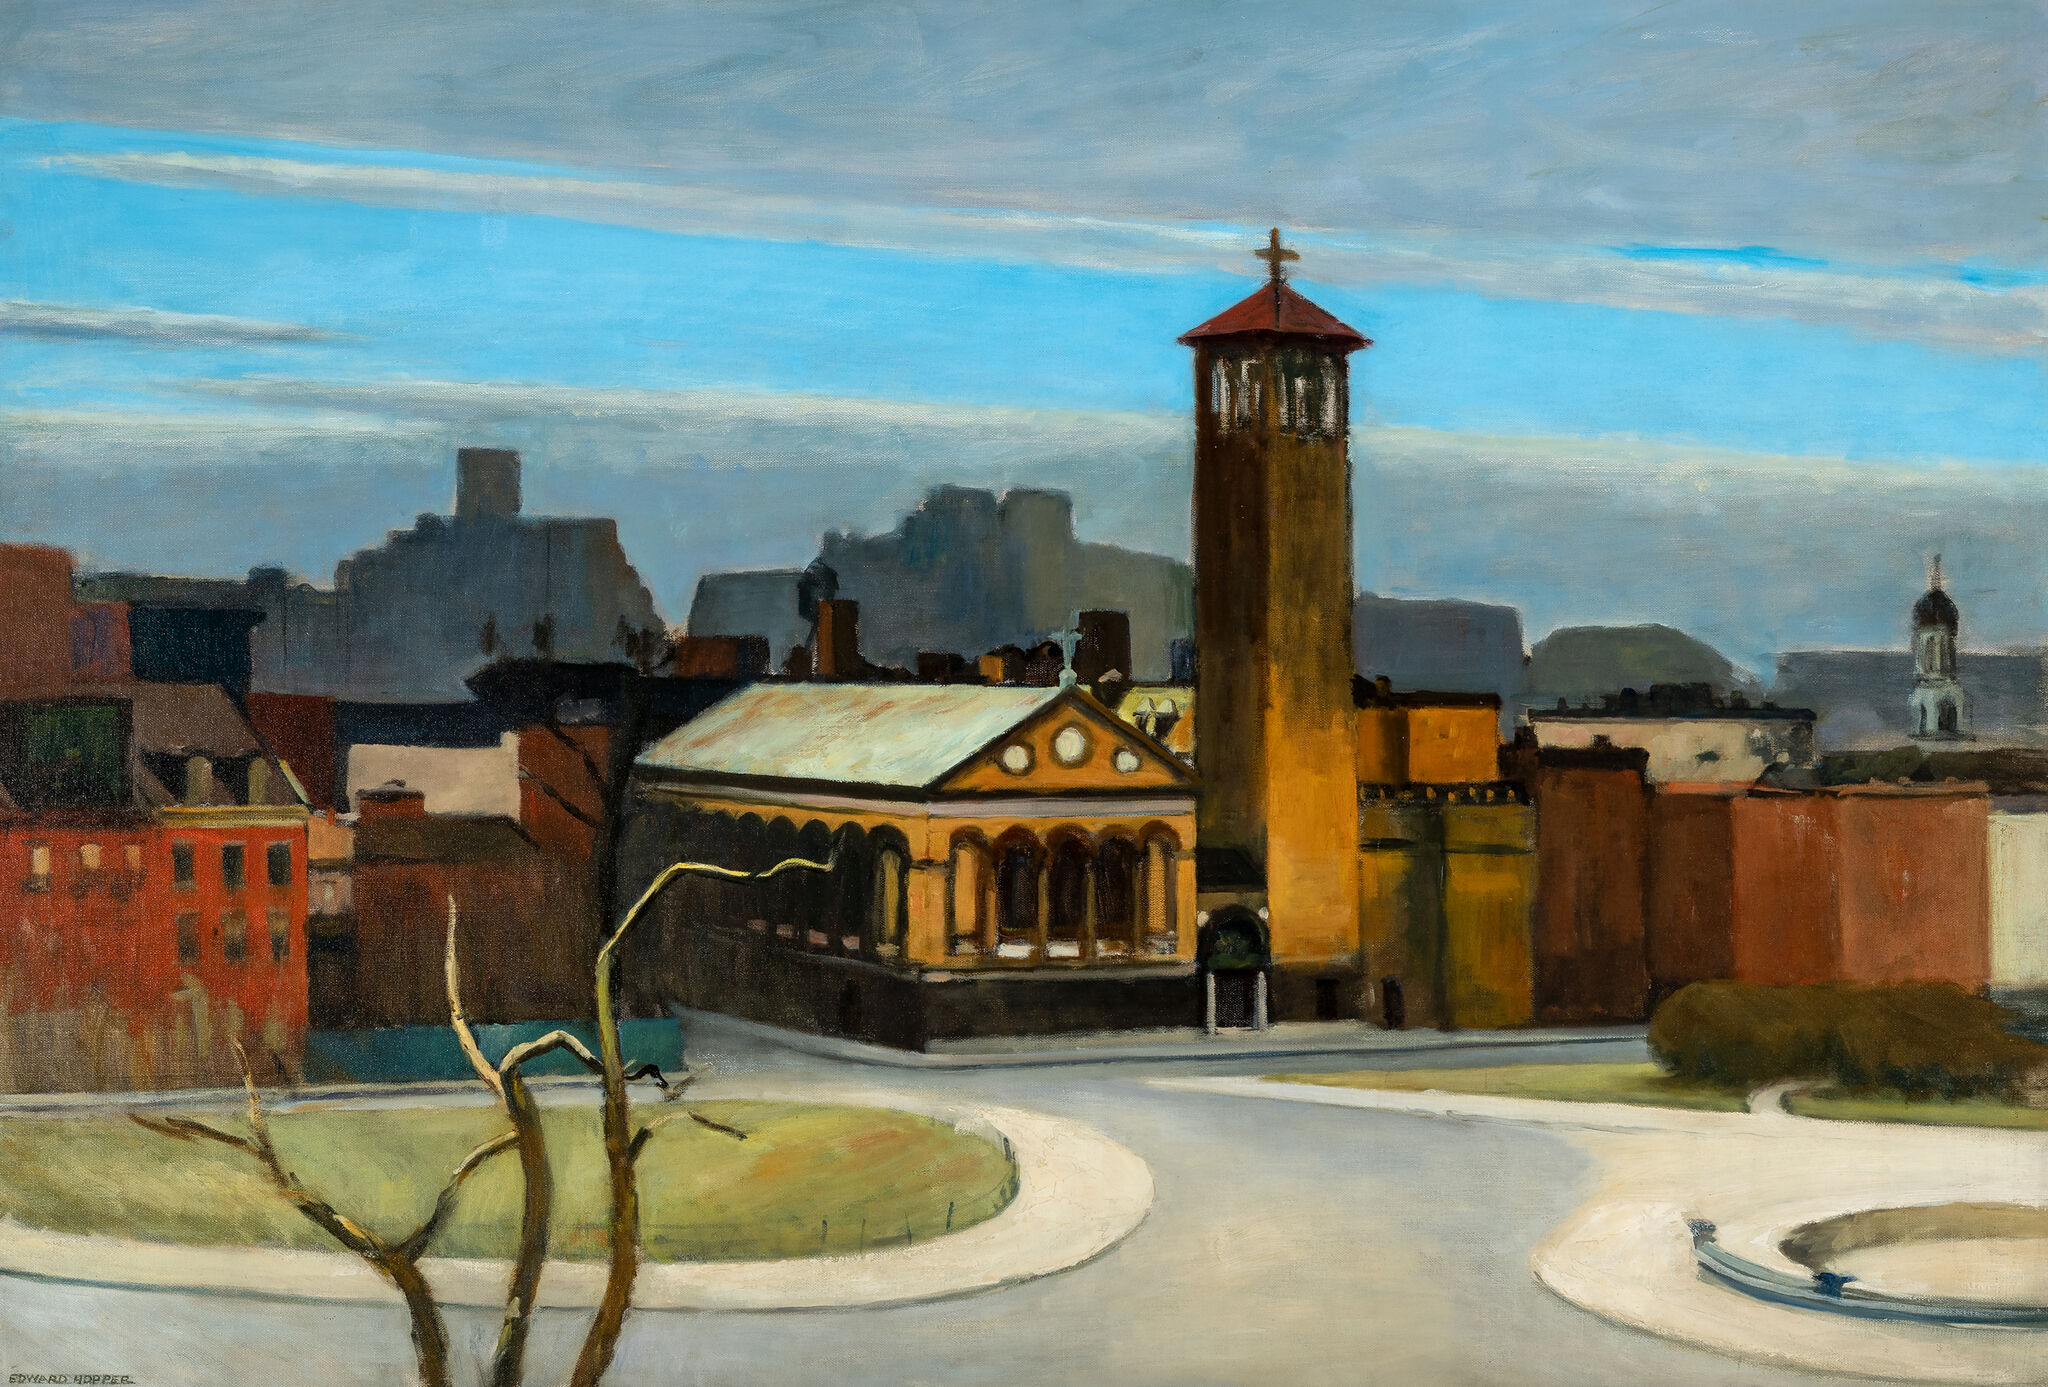 A painting of a city square with a tall tower. 